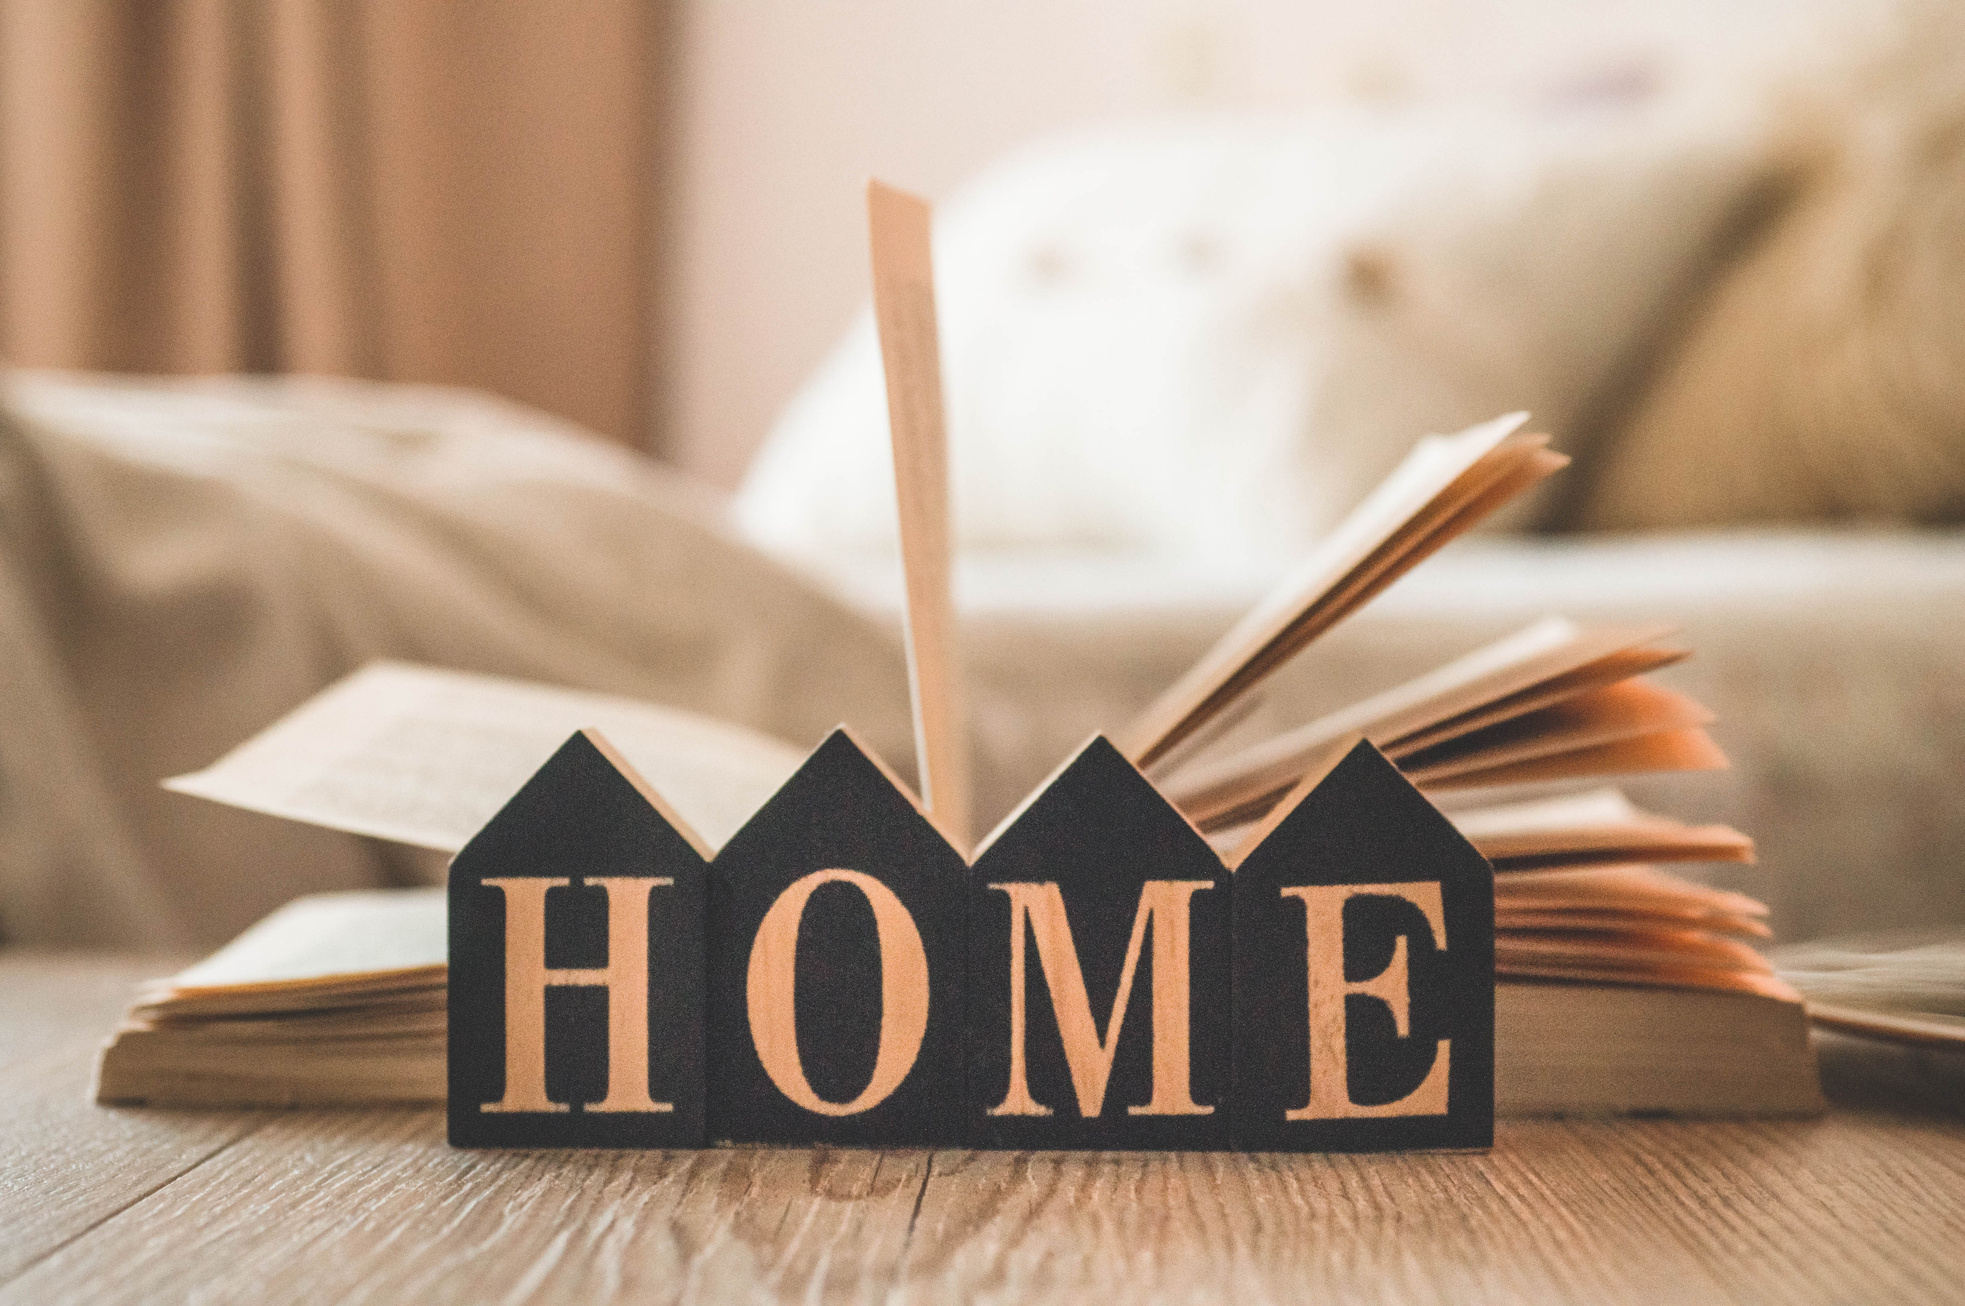 Book on the home background. Home and home decor